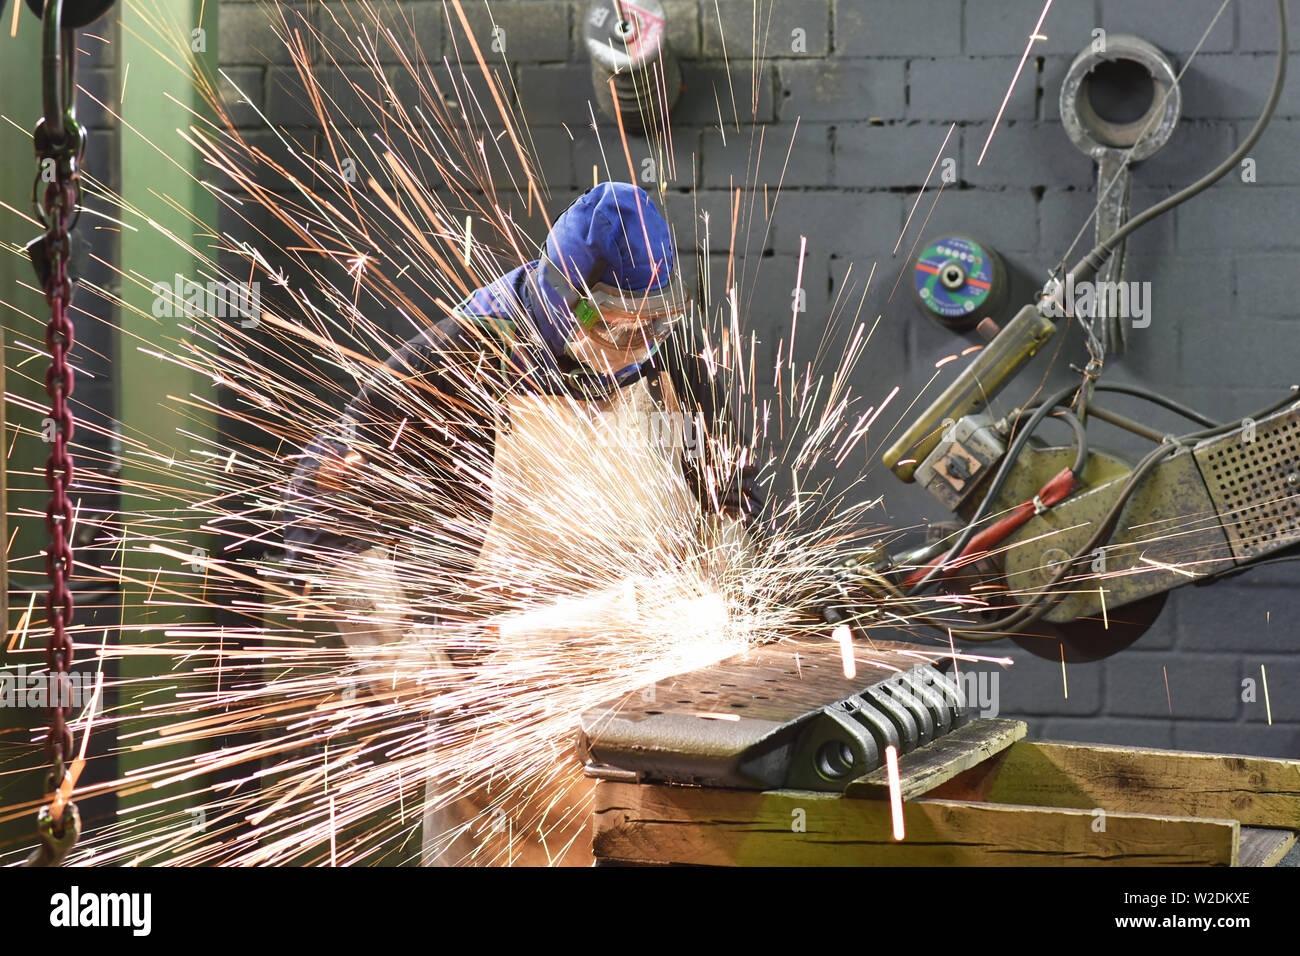 Workers in protective equipment in a foundry work on a casting with a grinding machine at the workplace Stock Photo